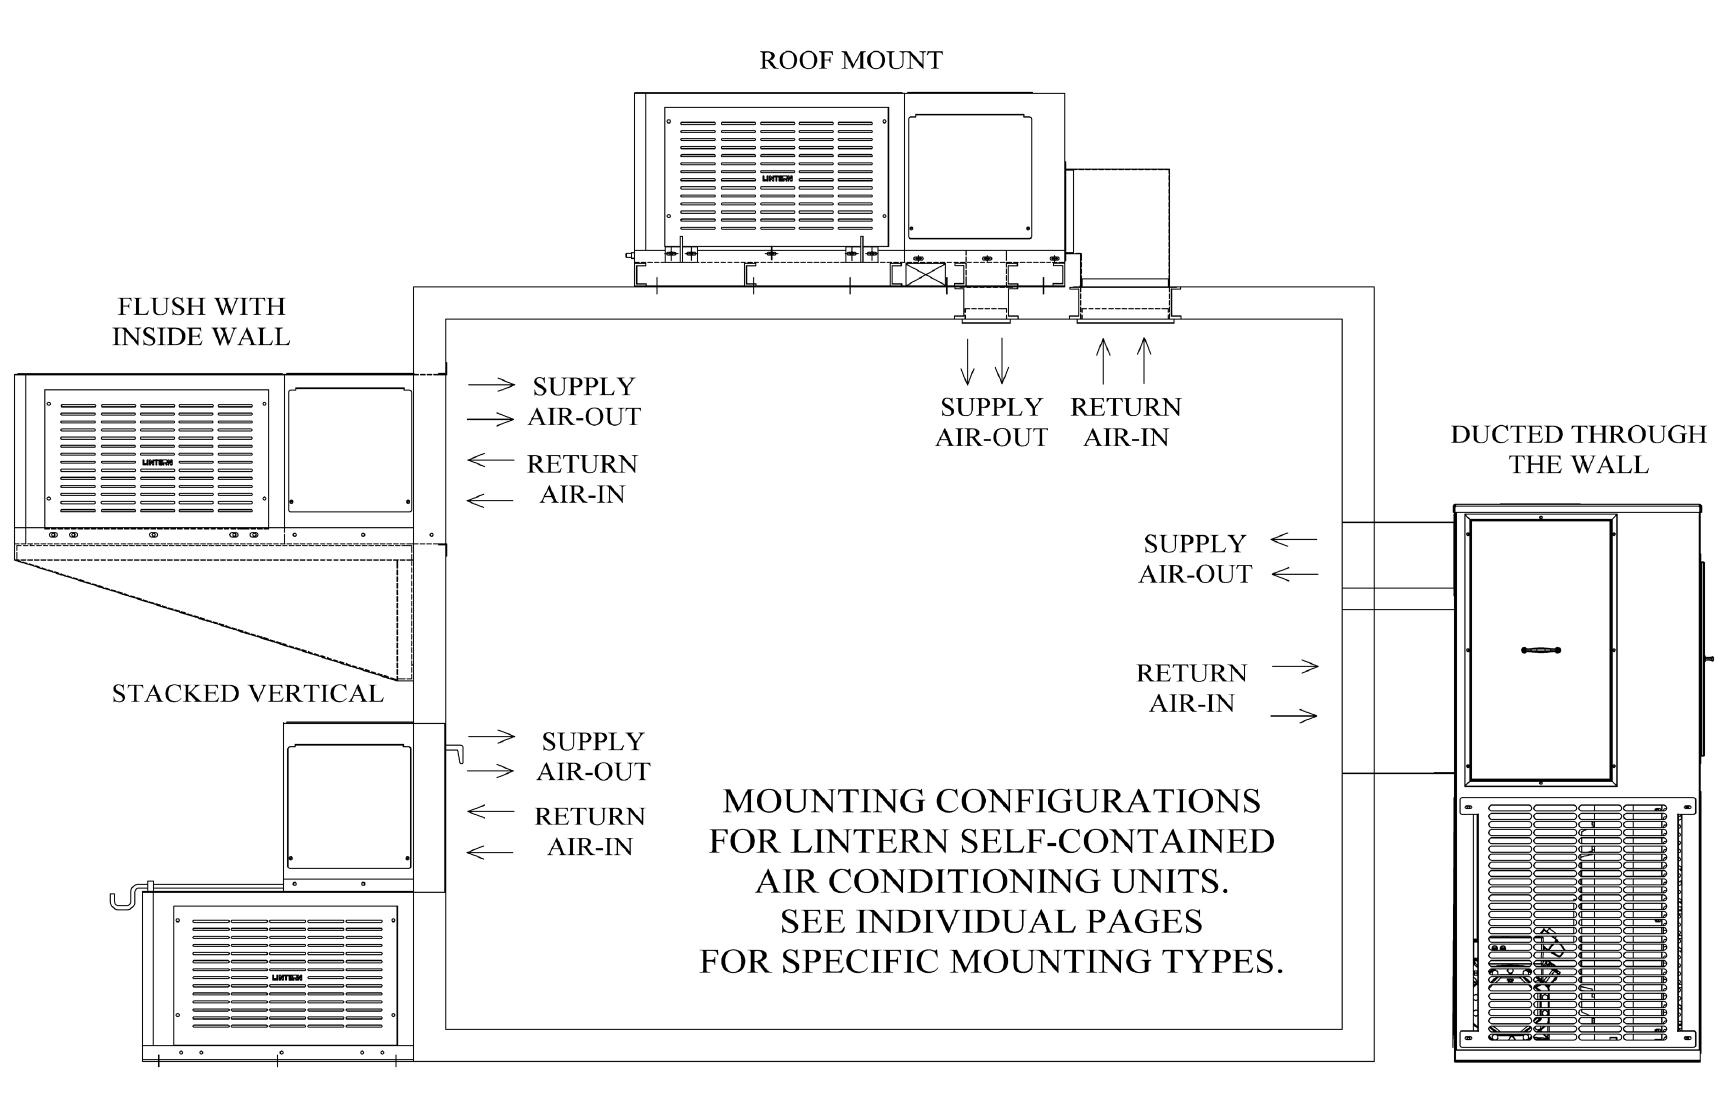 Self-contained Mounting Configuration